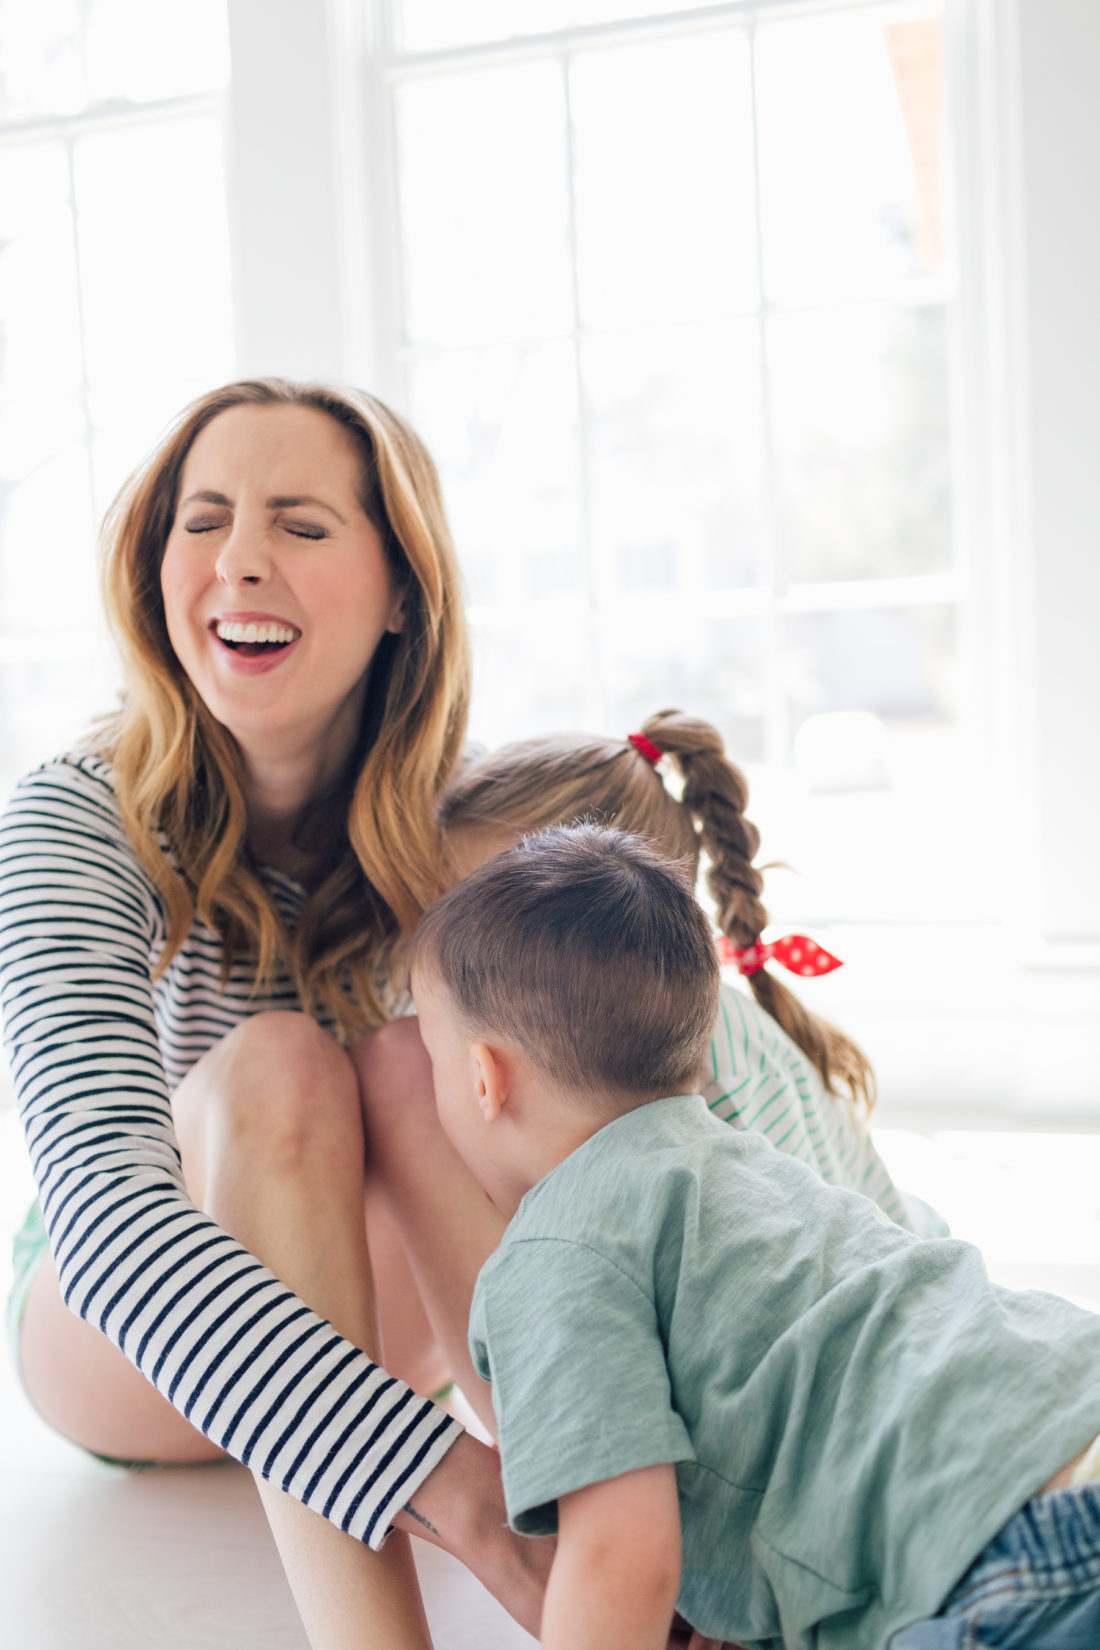 Eva Amurri Martino of Happily Eva After plays with her kids Marlowe and Major on the floor of their new home in Connecticut